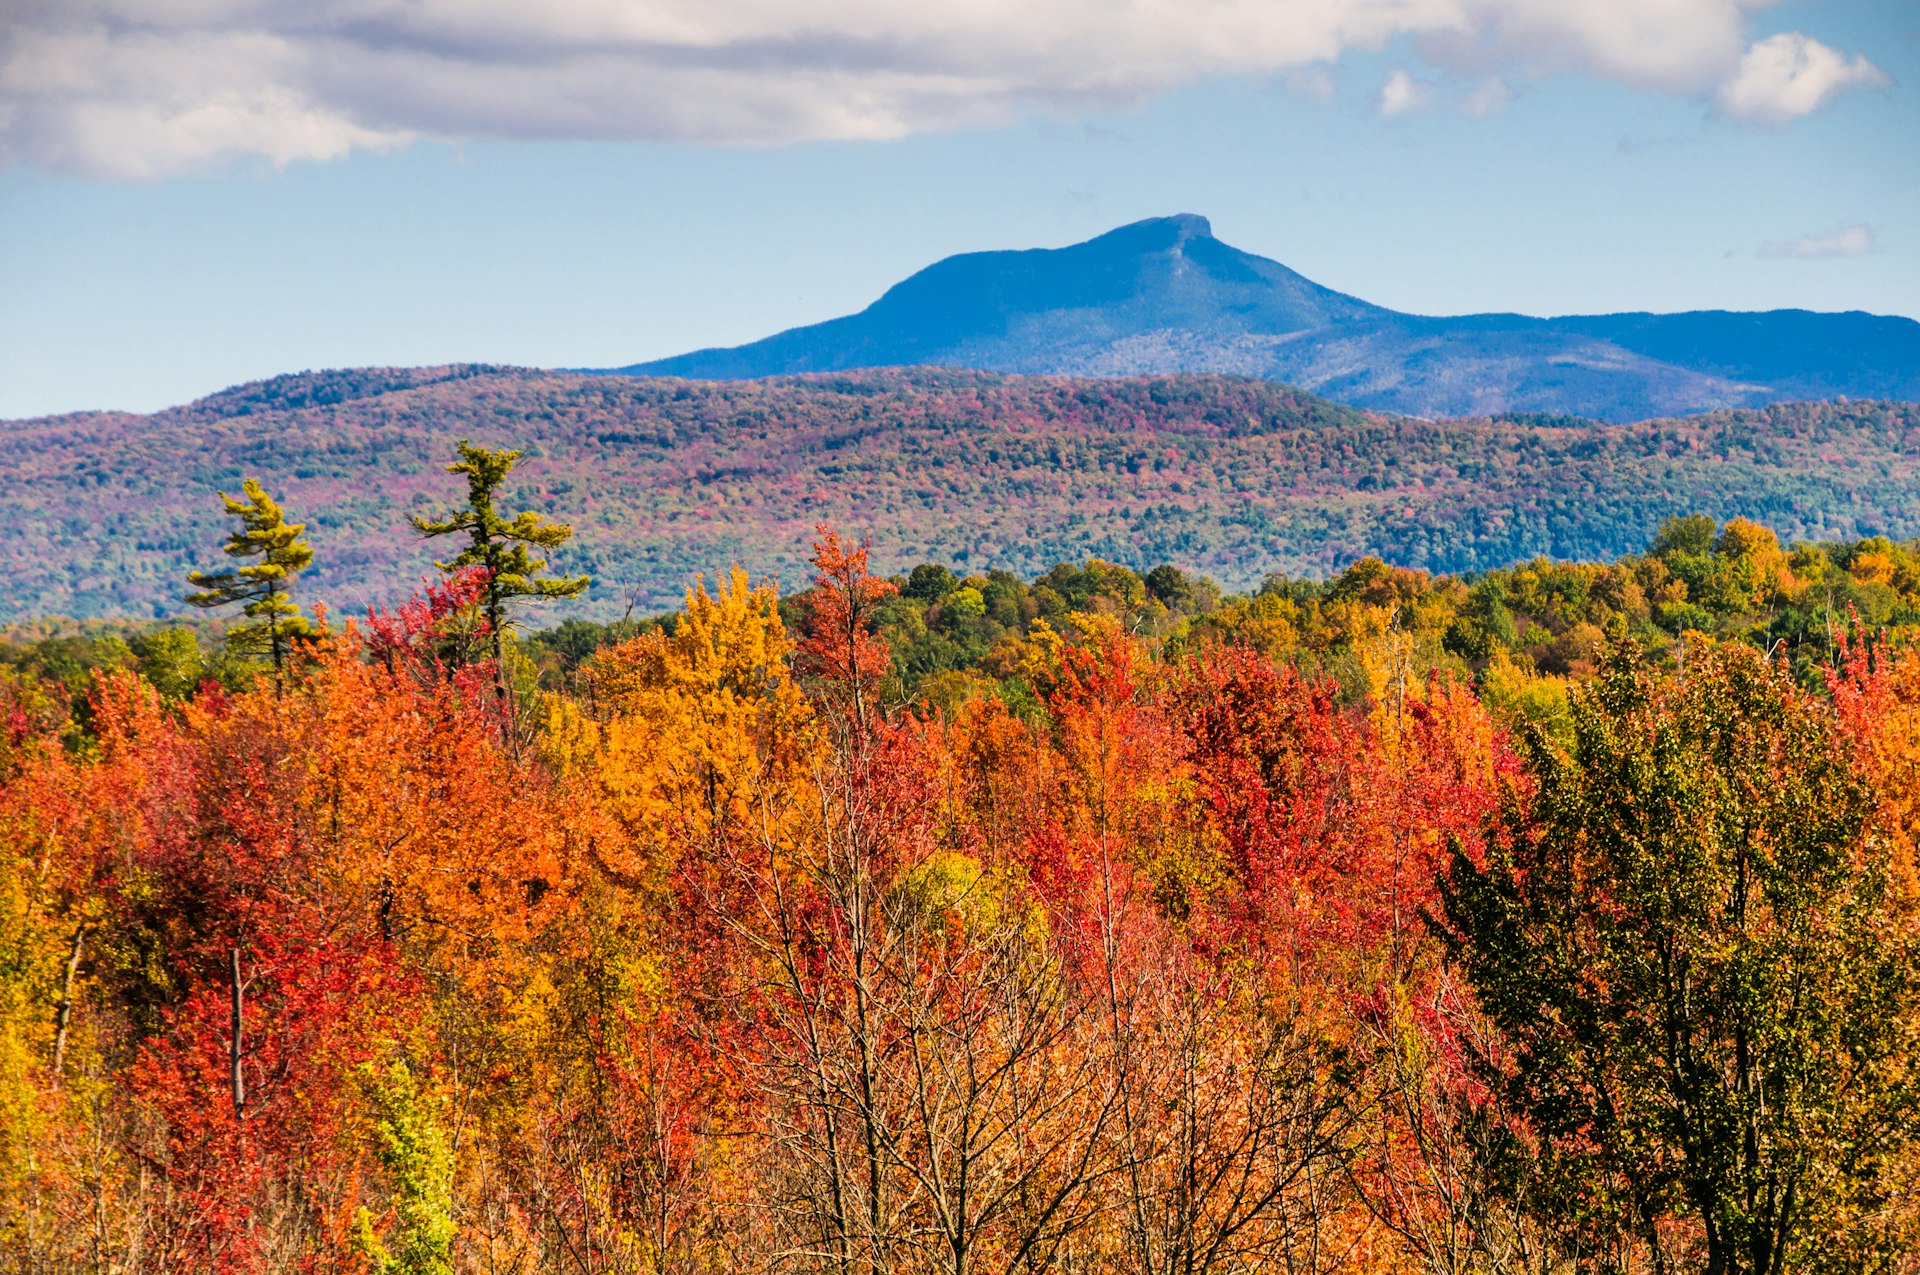 Brilliant fall foliage covers the valleys below Camel's Hump Mountain (4083 feet).